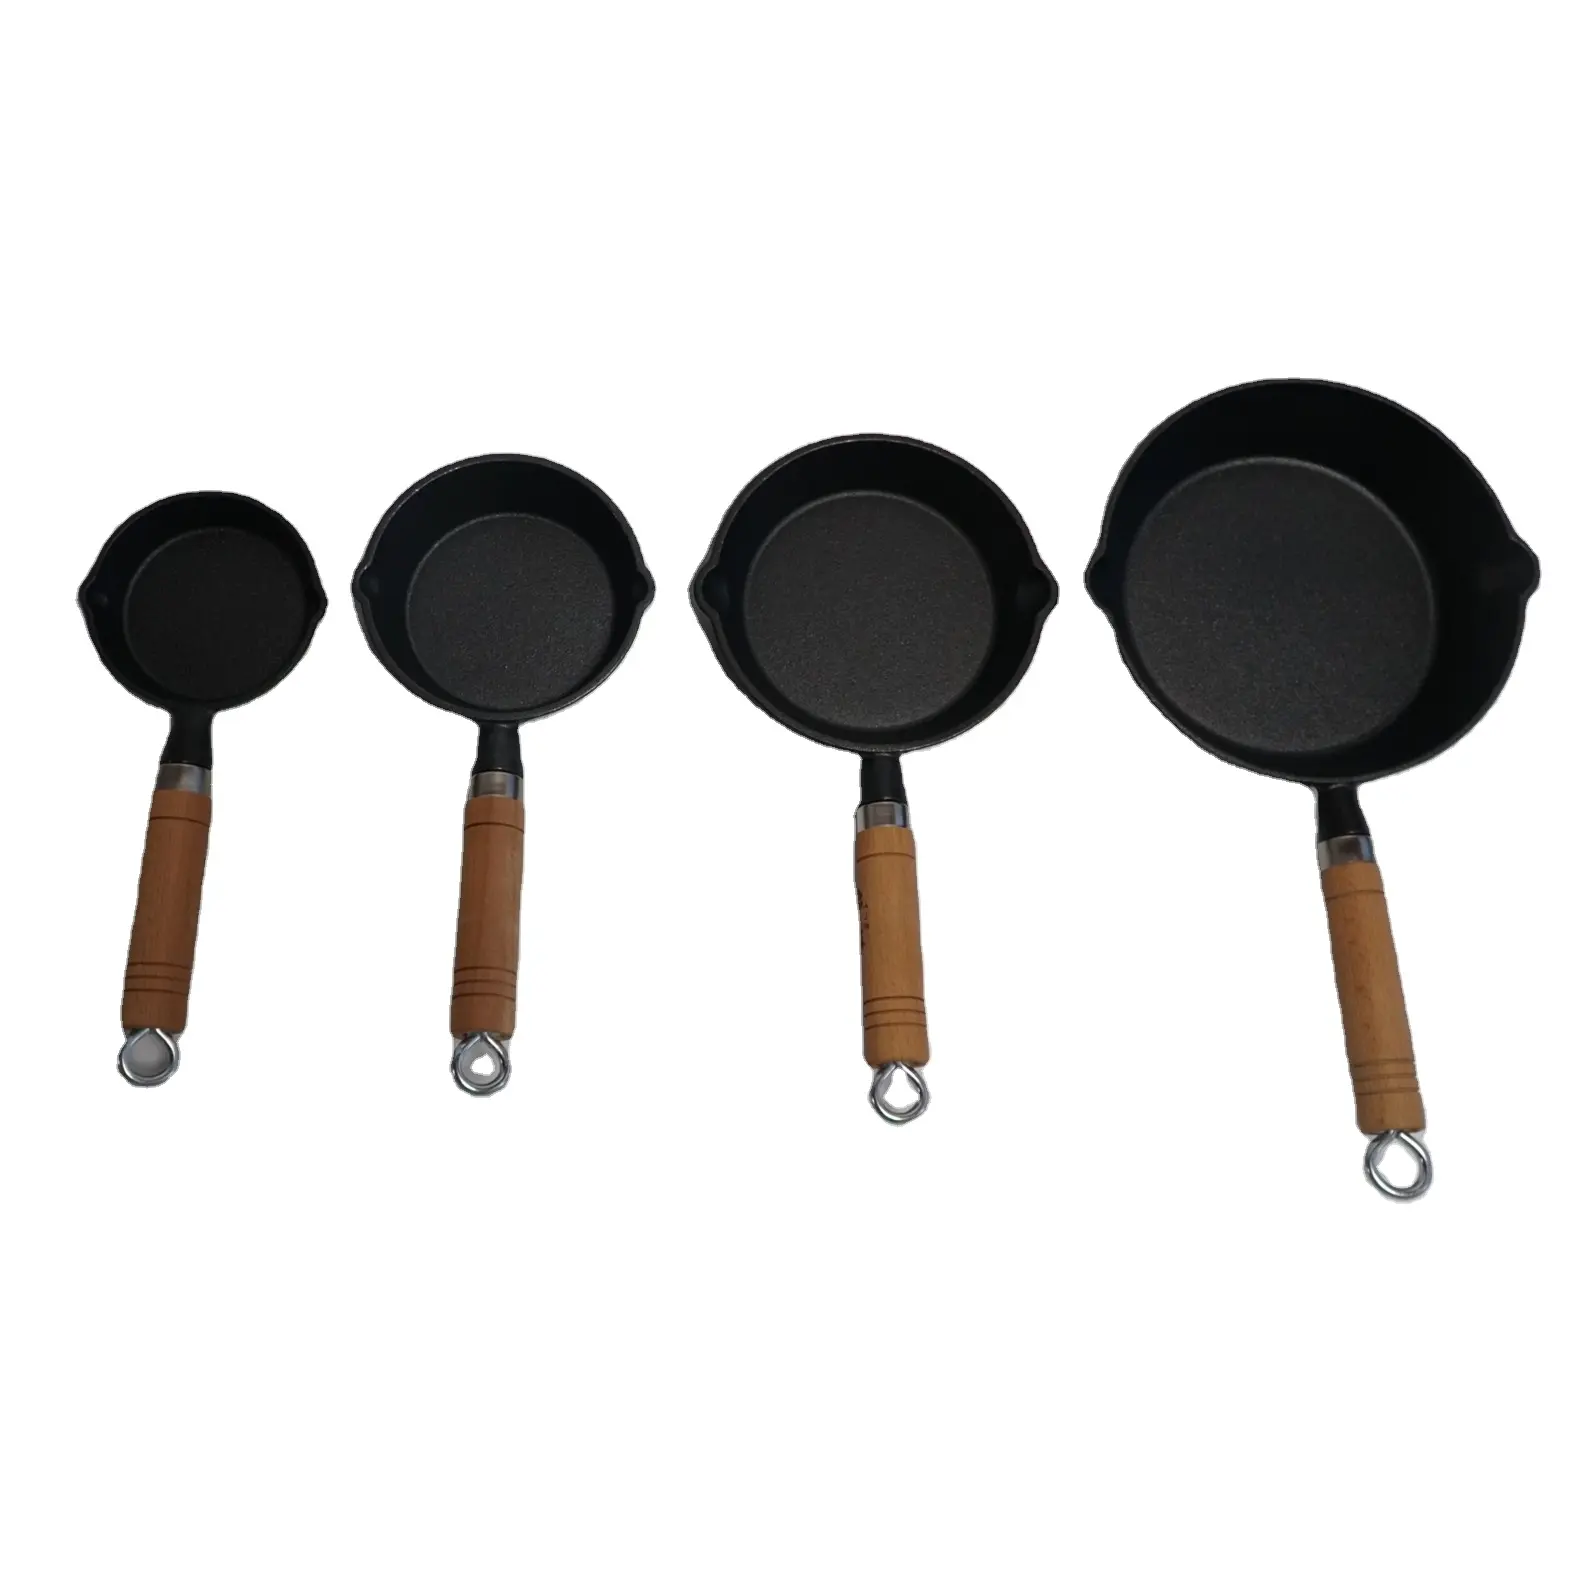 Hot Sell Mini Cast Iron Skillet Fry Pan Egg Pan with Removable Handle Mini Frying Pan for One Egg Chef's Cookware Kitchen